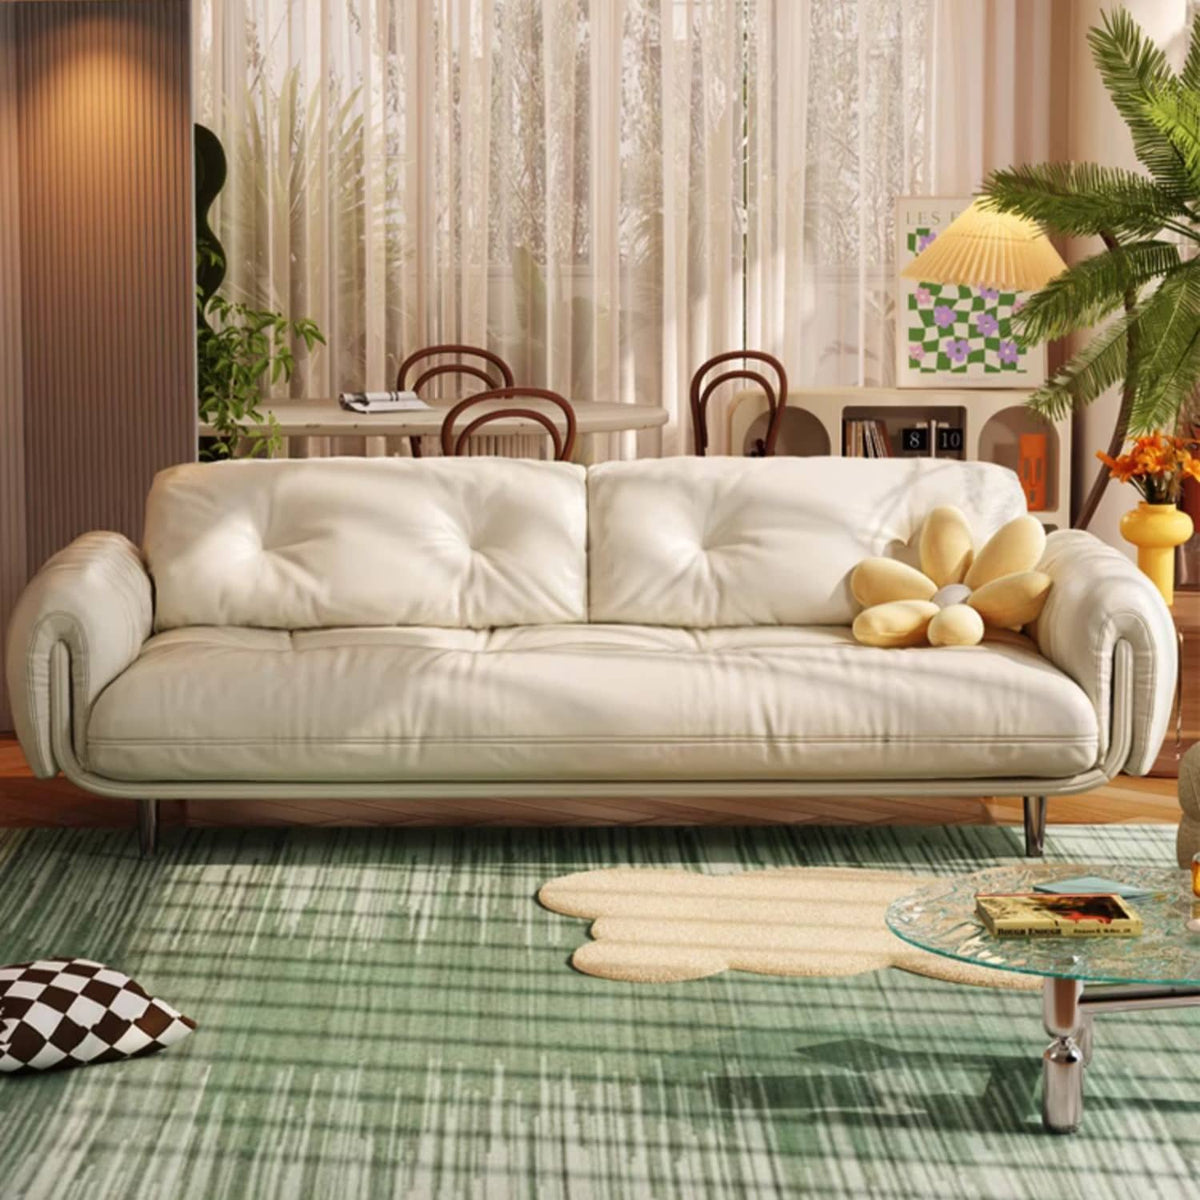 Luxurious Beige Sofa with Solid Wood Frame & Stainless Steel Accents - Premium Down & Faux Leather Upholstery fbby-1389